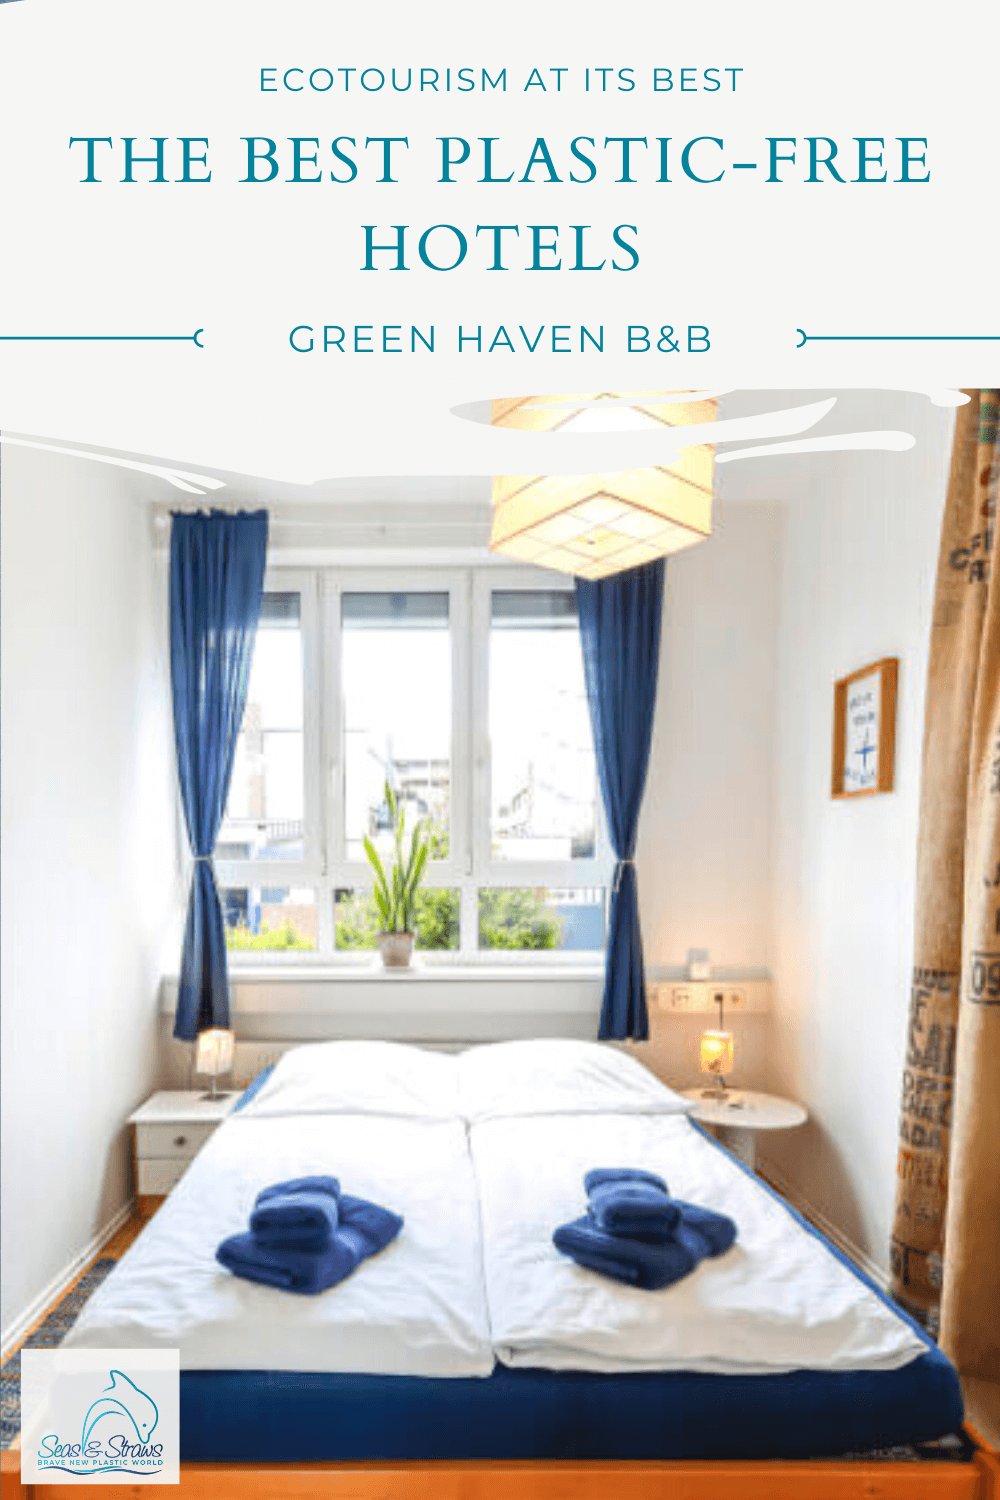 The best Plastic-free hotels - The Green Haven